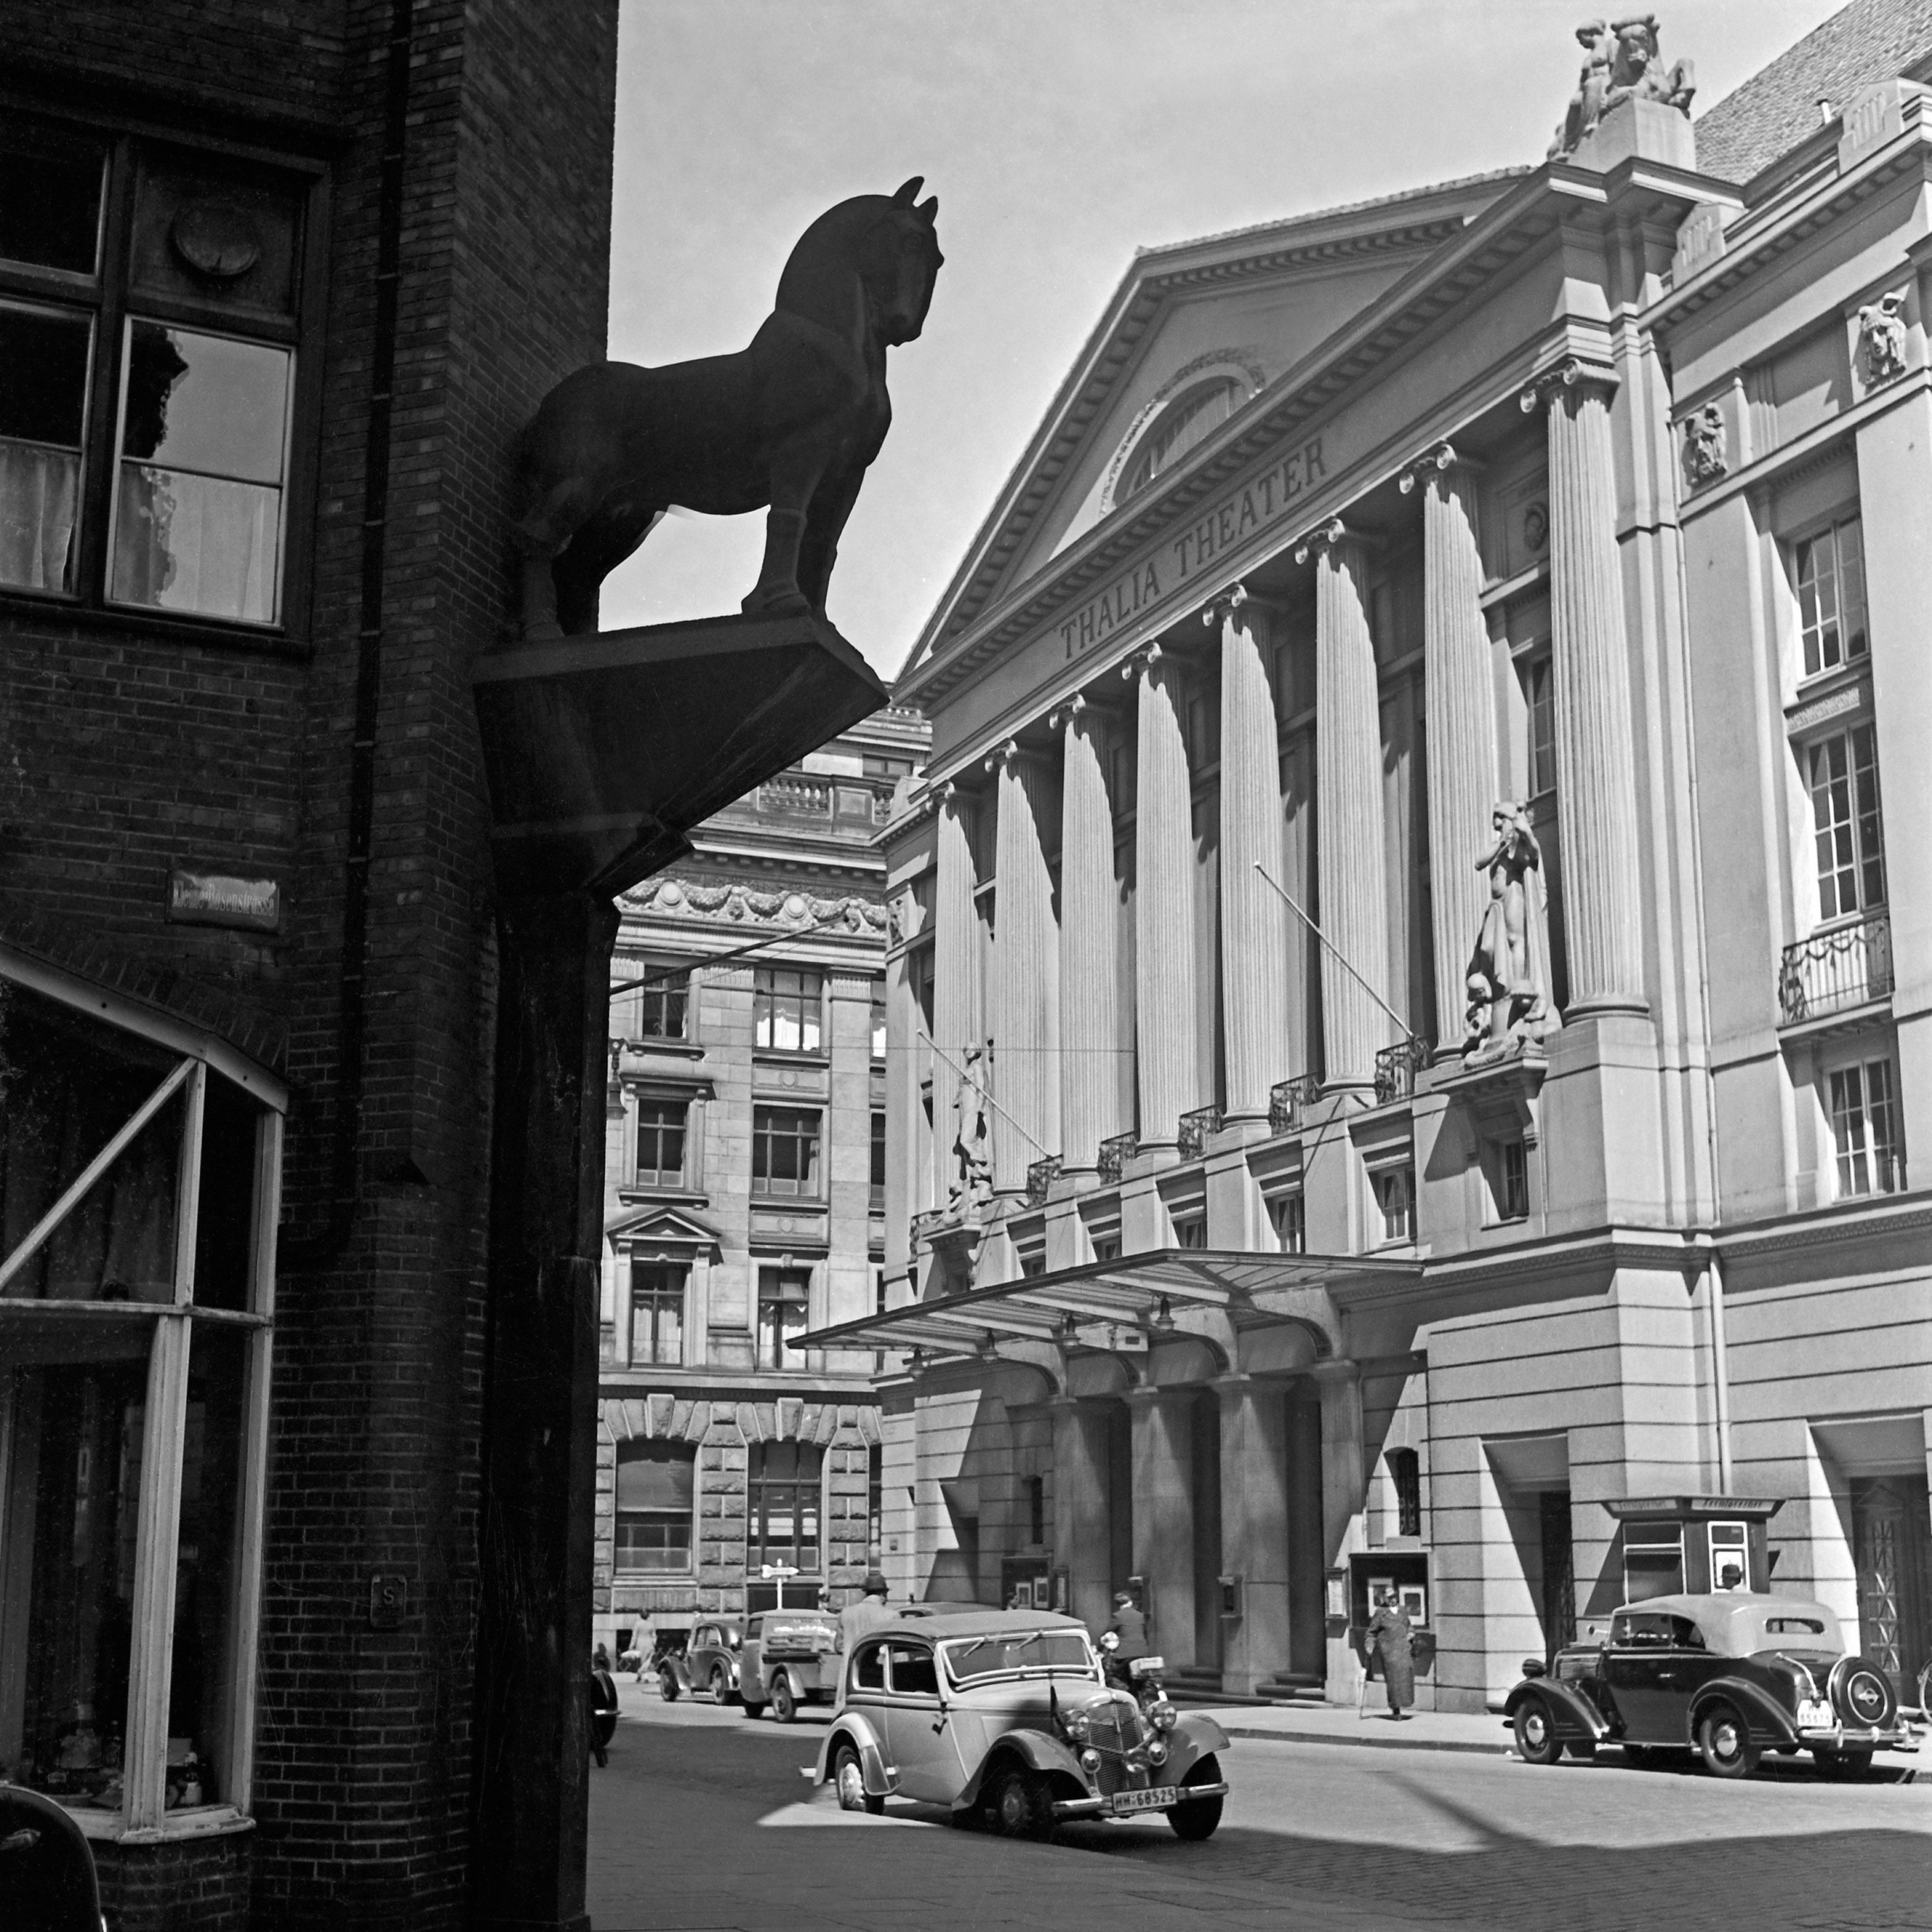 Karl Heinrich Lämmel Black and White Photograph - Hamburg Thalia Theatre cars and horse sculpture, Germany 1938 Printed Later 